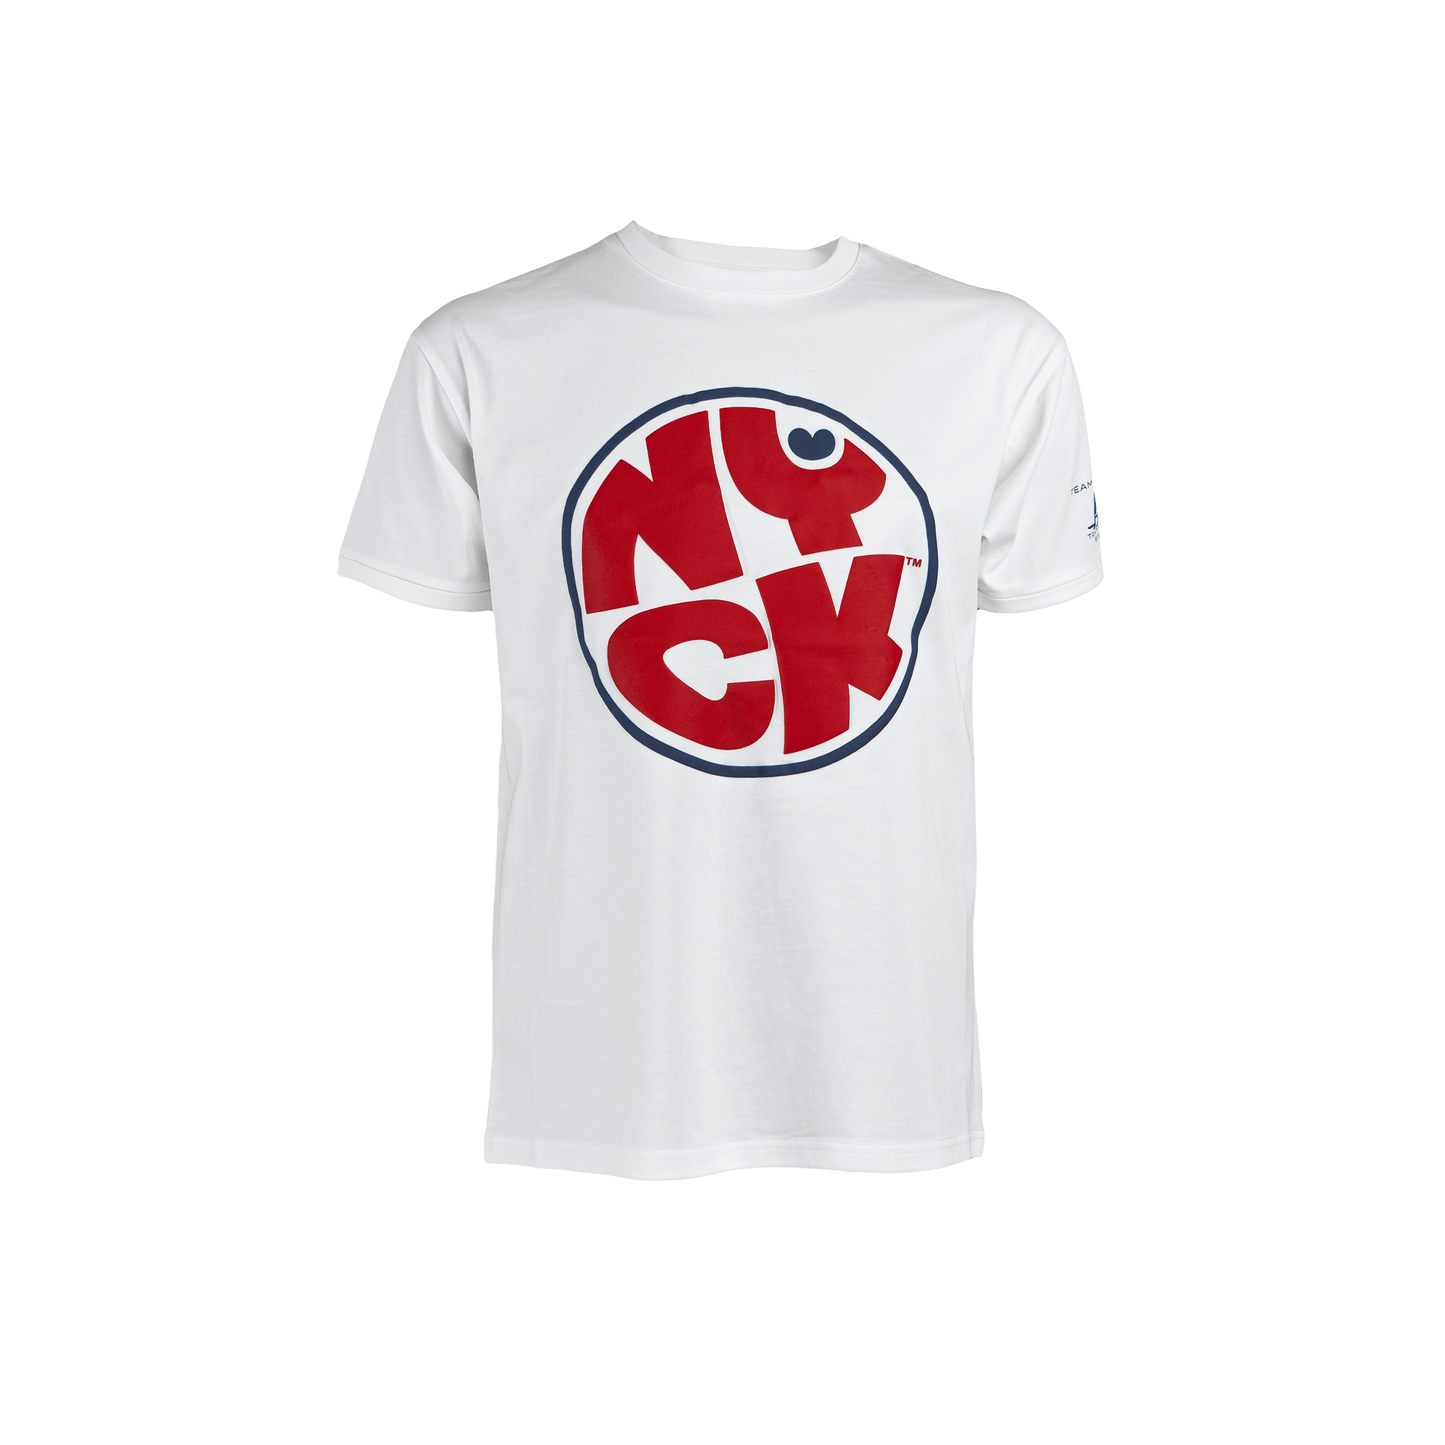 The official NYCK logo t-shirt